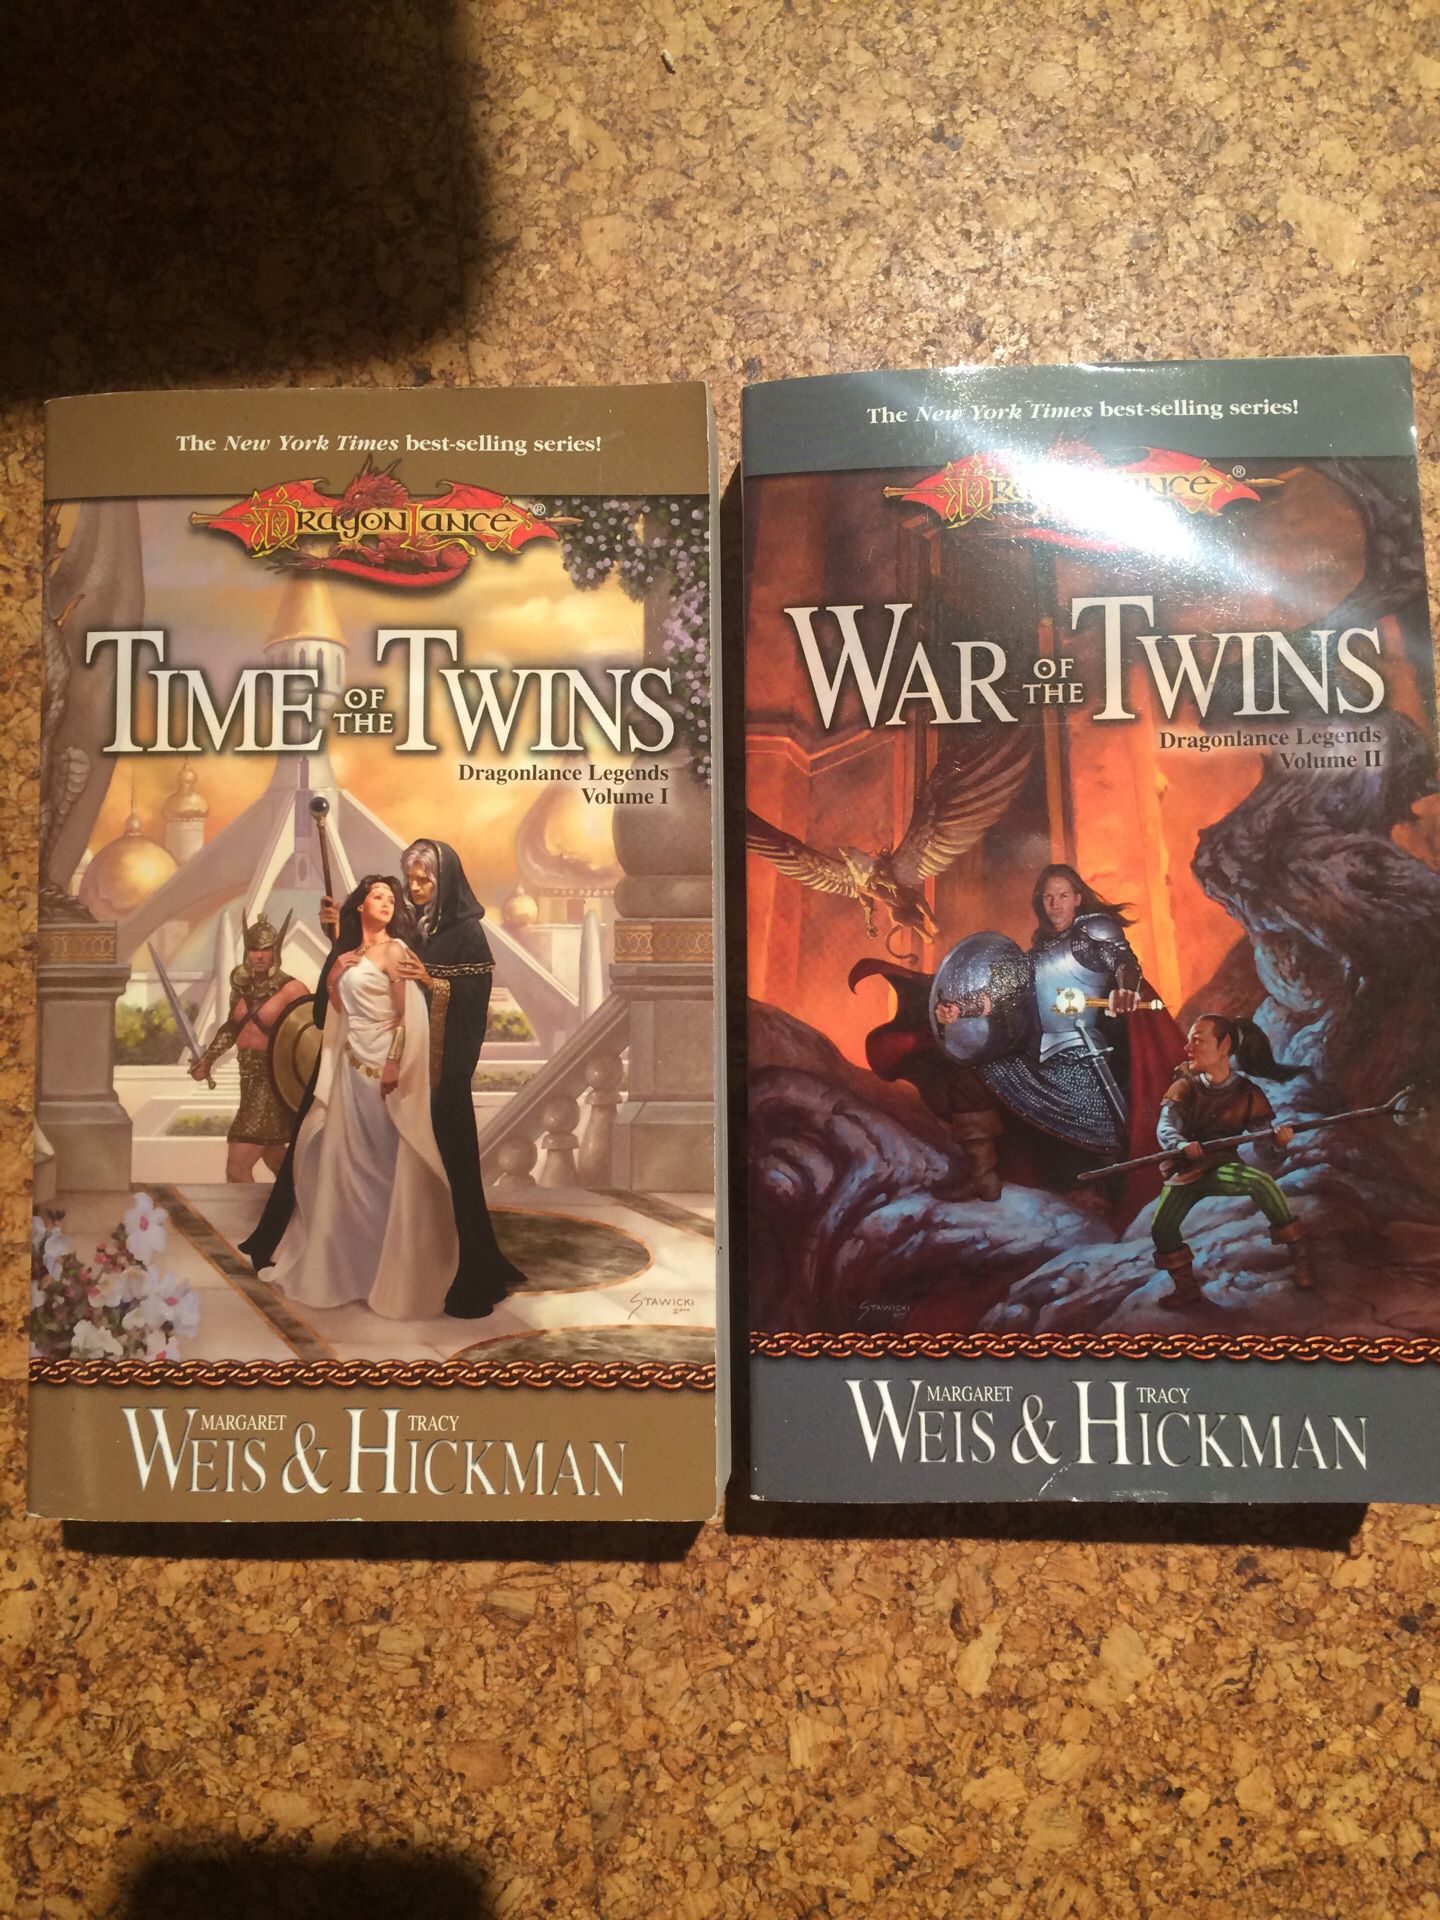 Lot of two Dragonlance novels from Legends series by Weis and Hickman